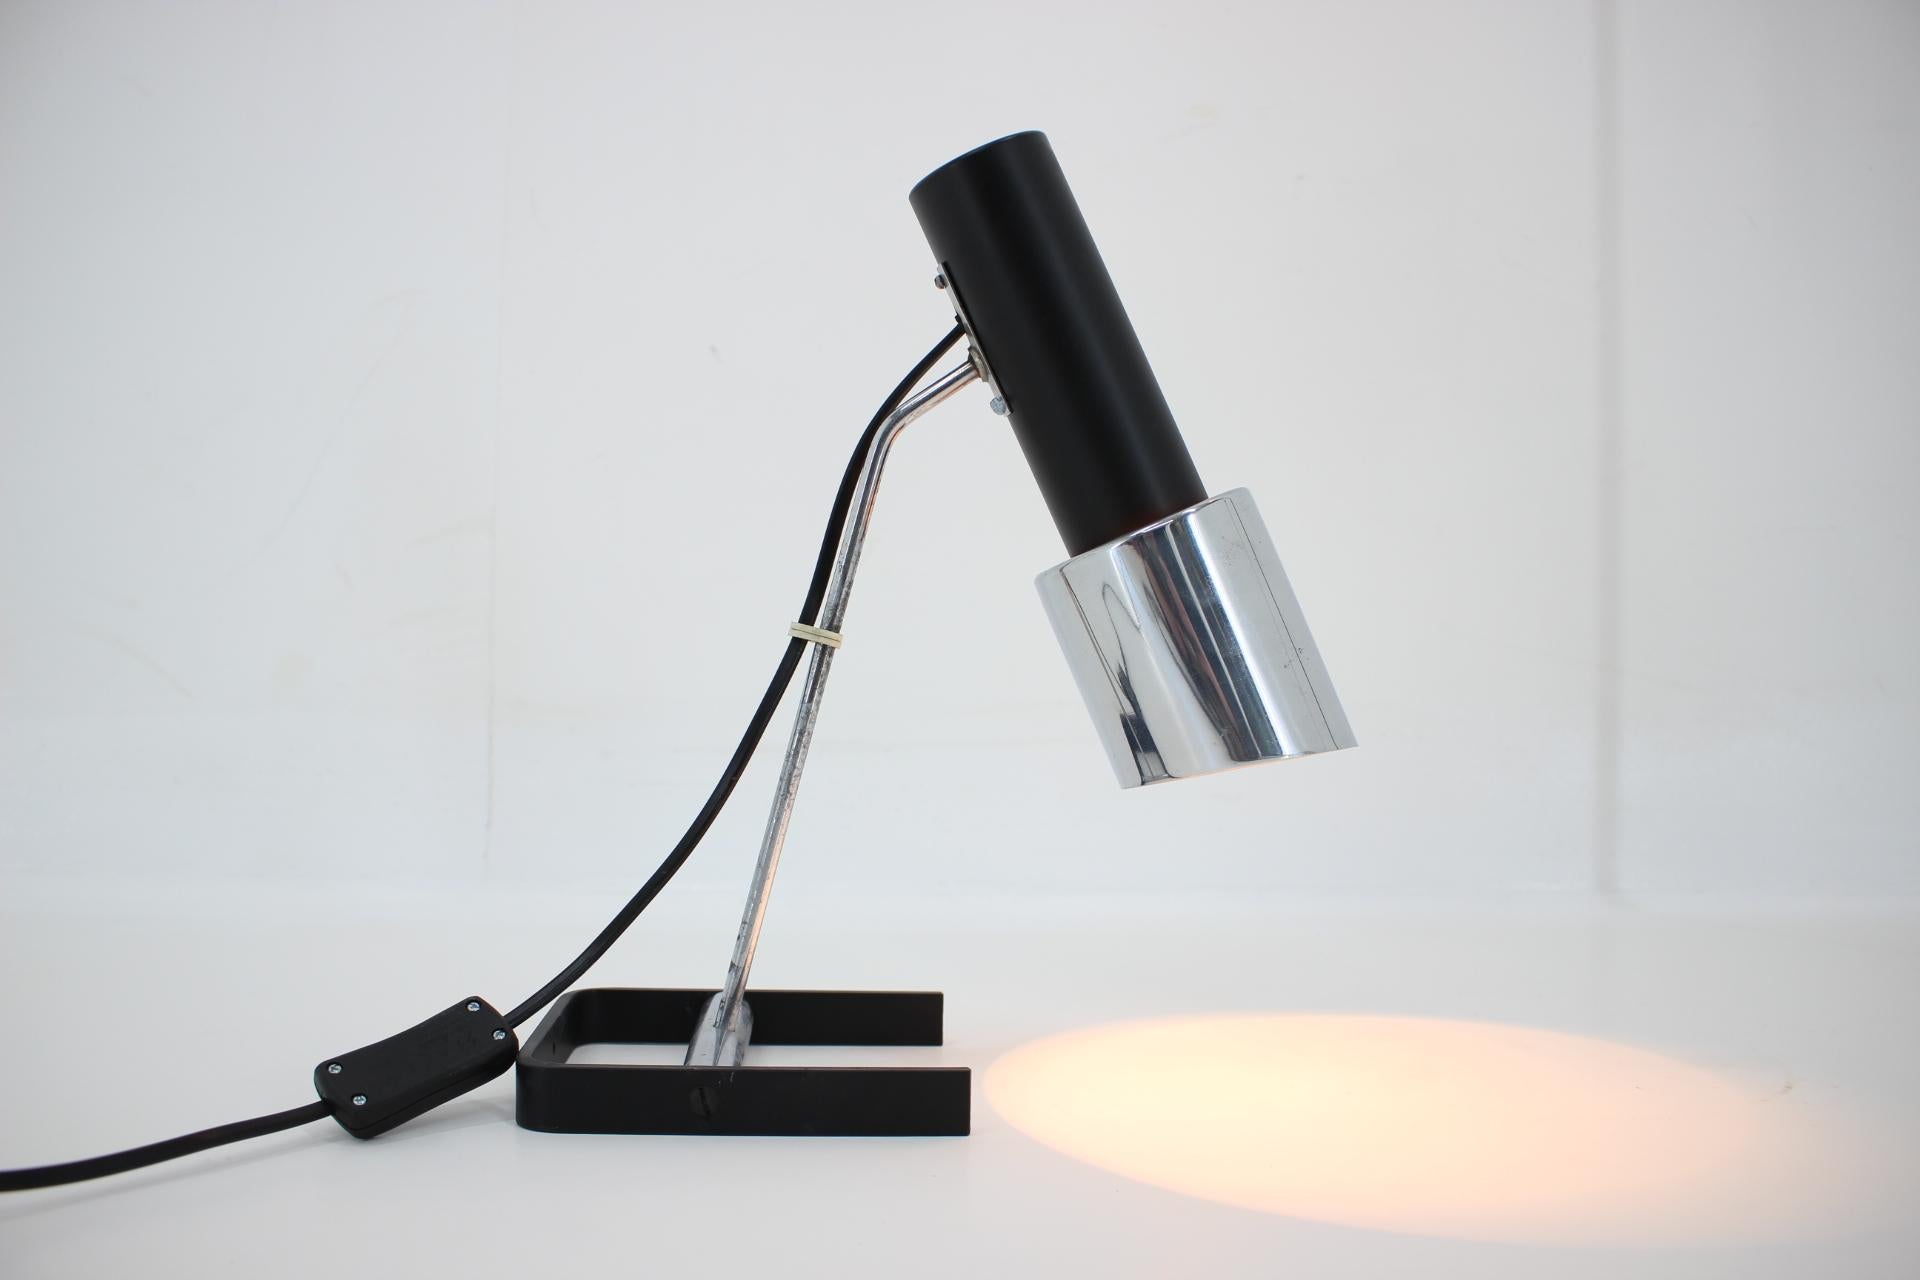 Mid-20th Century Rare Midcentury Design Set of Floor and Table Lamp, 1960s / Czechoslovakia For Sale